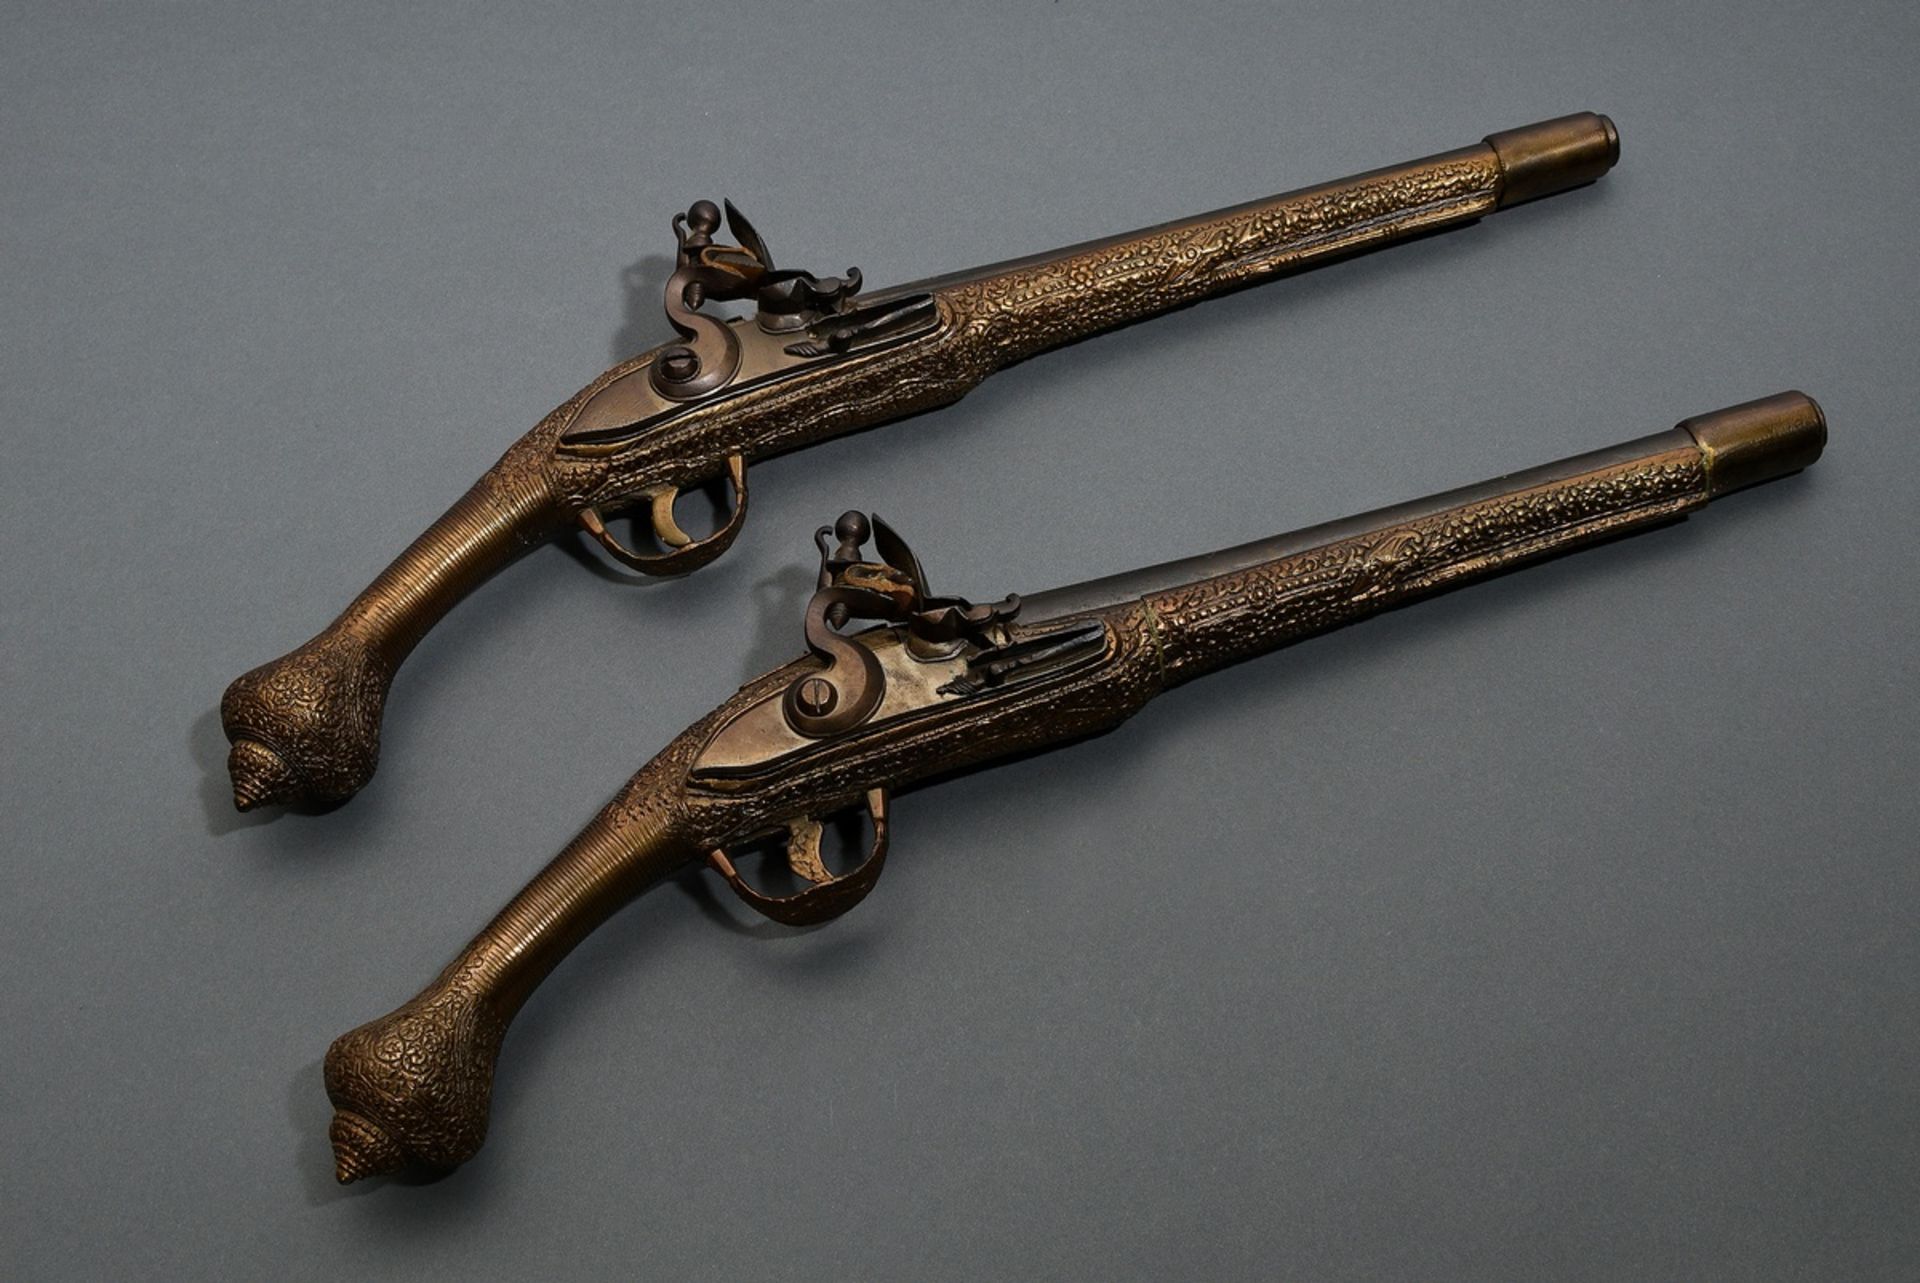 2 Ottoman muzzle loading flintlock pistols, smooth bore with engraved brass overlay, calibre 14mm, 